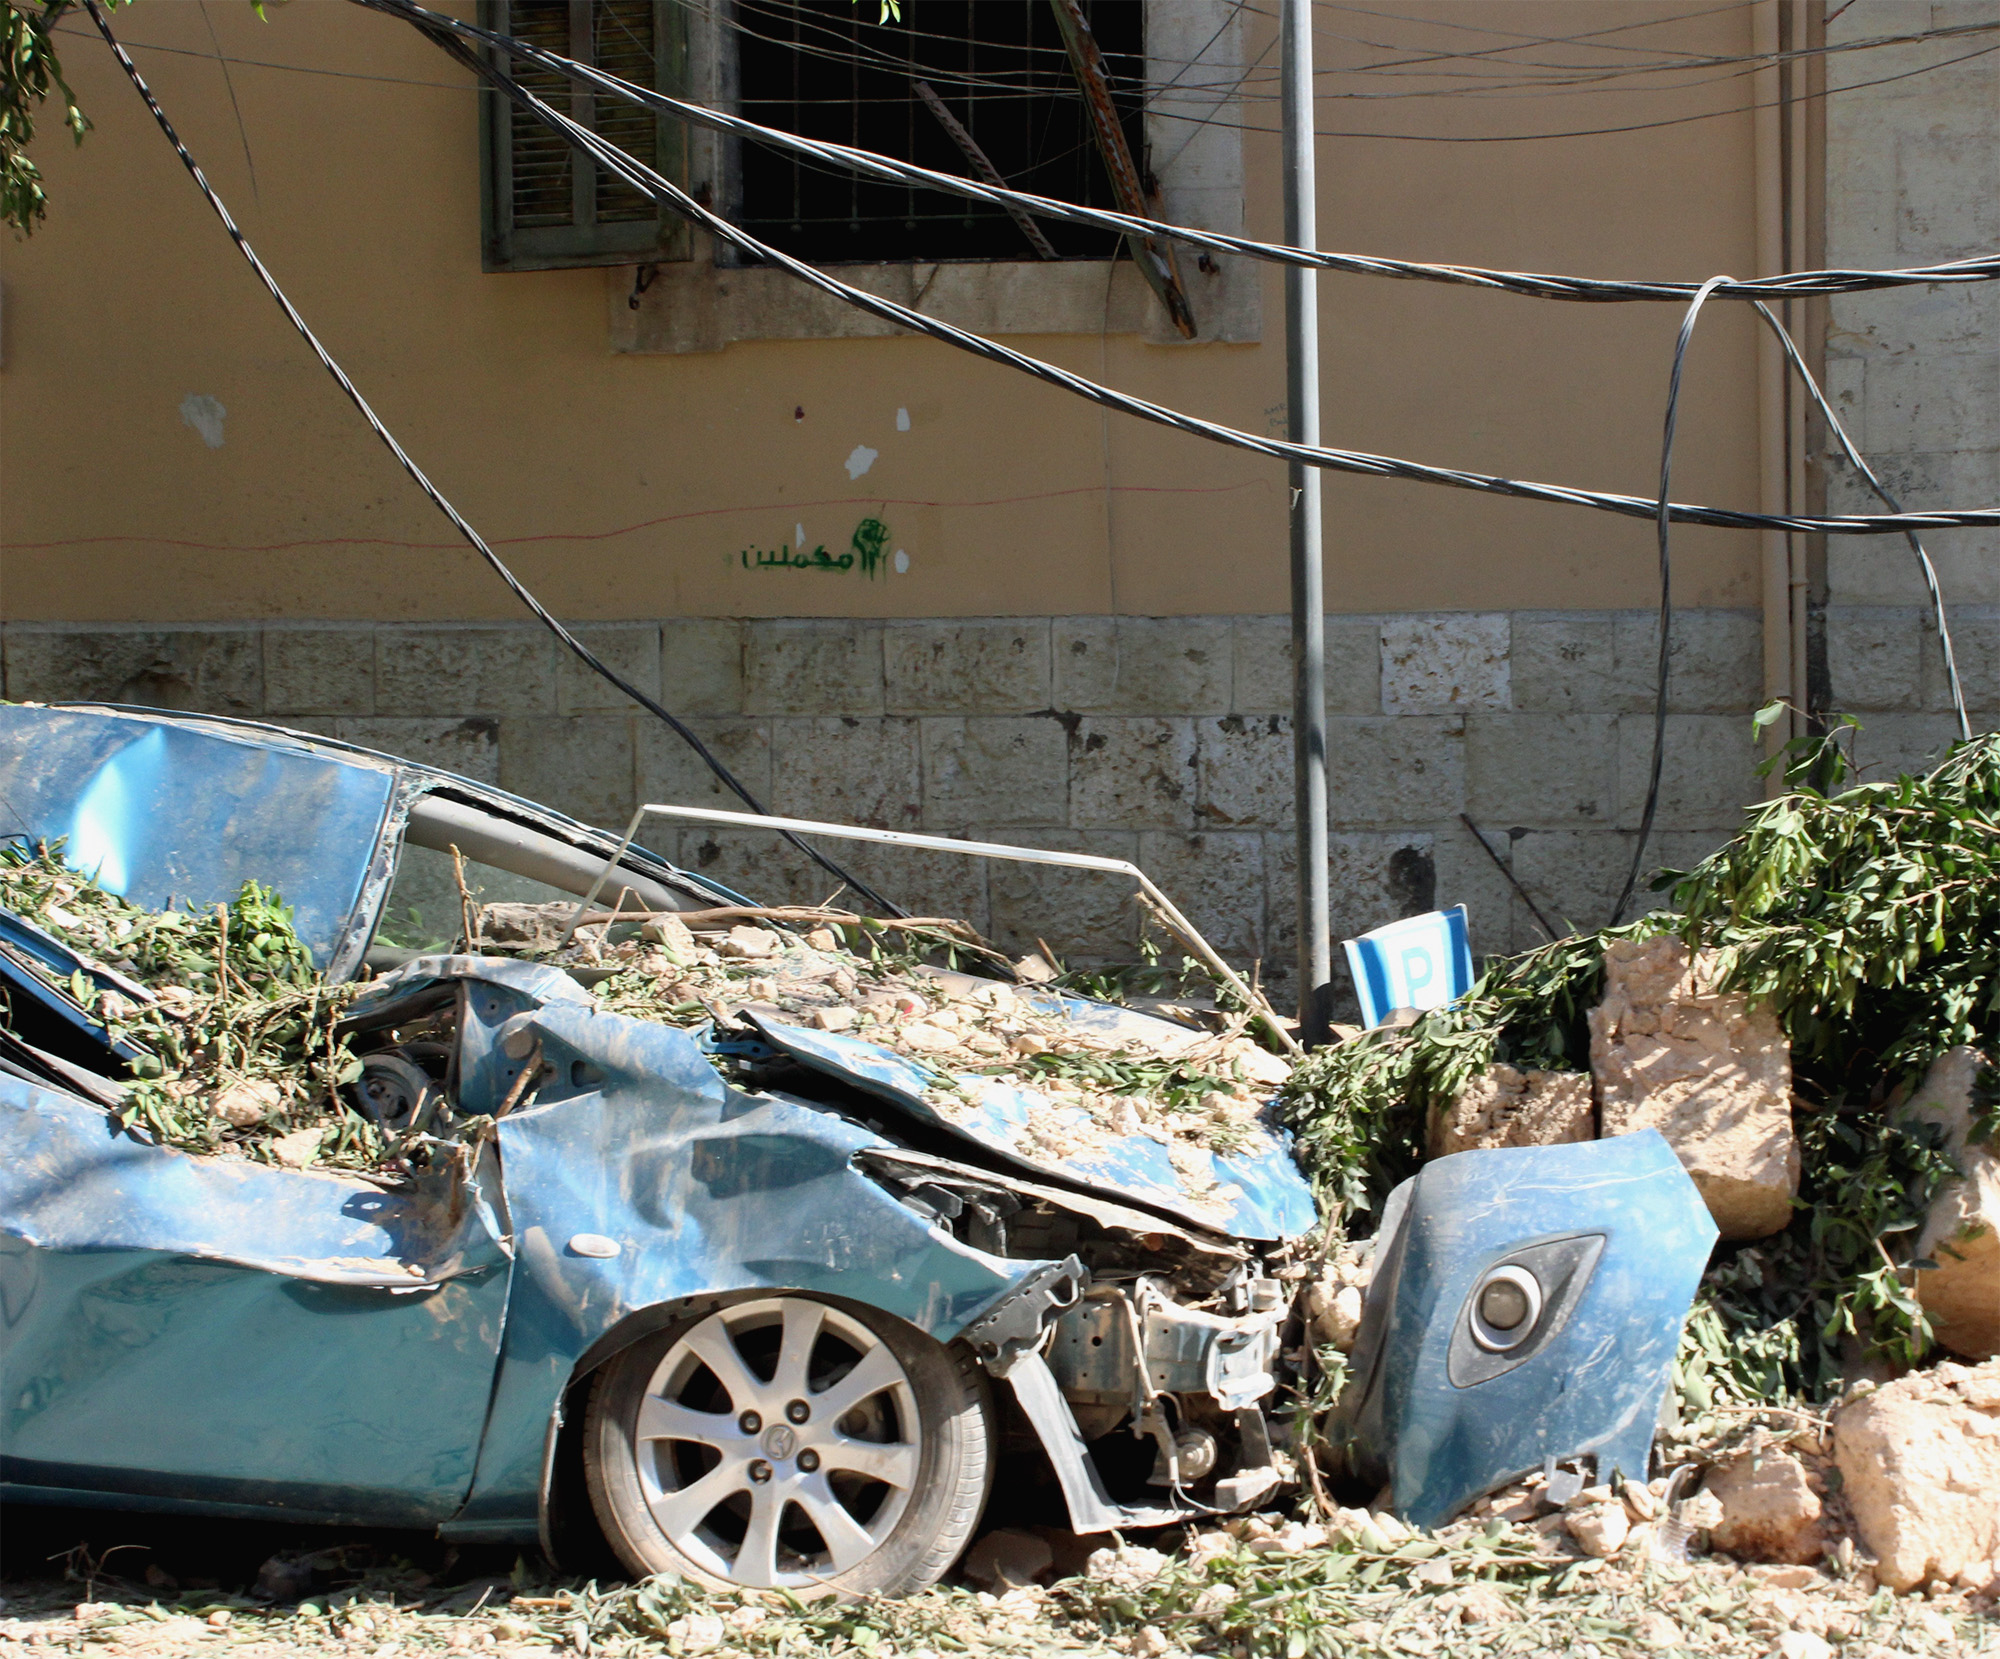 Ablue car is wrecked at the side of the road, covered in debris from a nearby building after the Beirut blast.